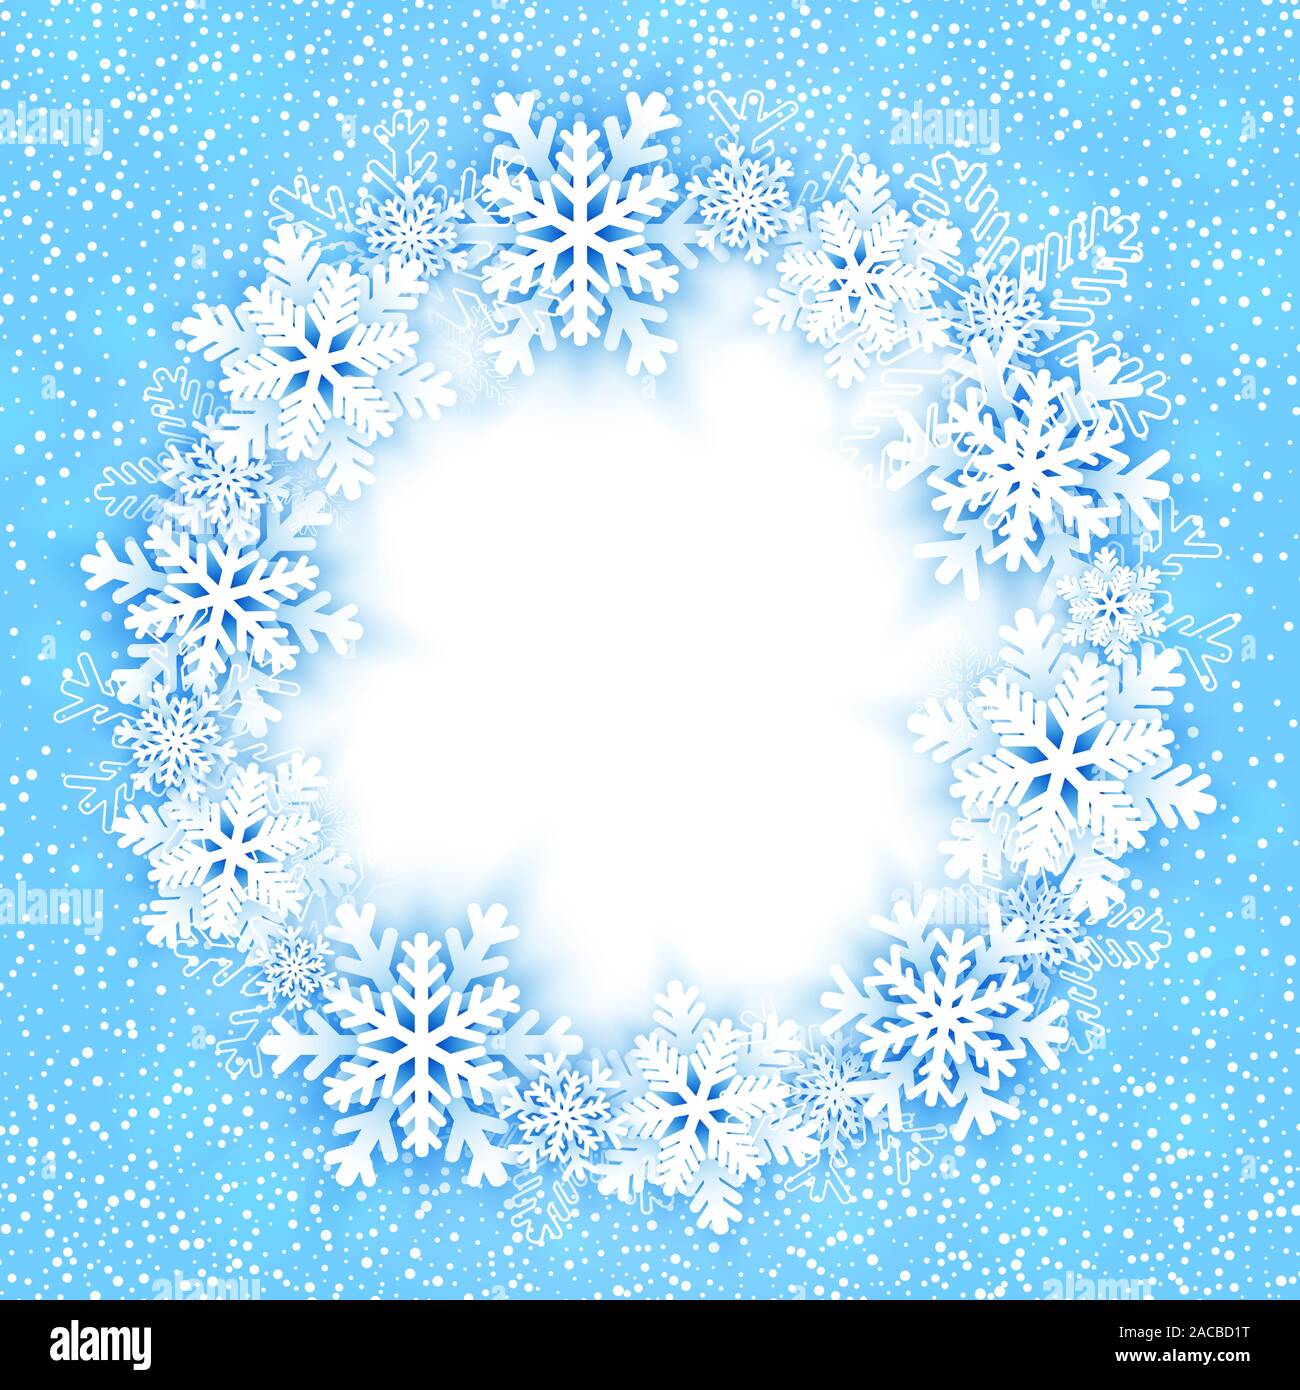 Christmas round frame with snowflakes. Vector illustration Stock Vector